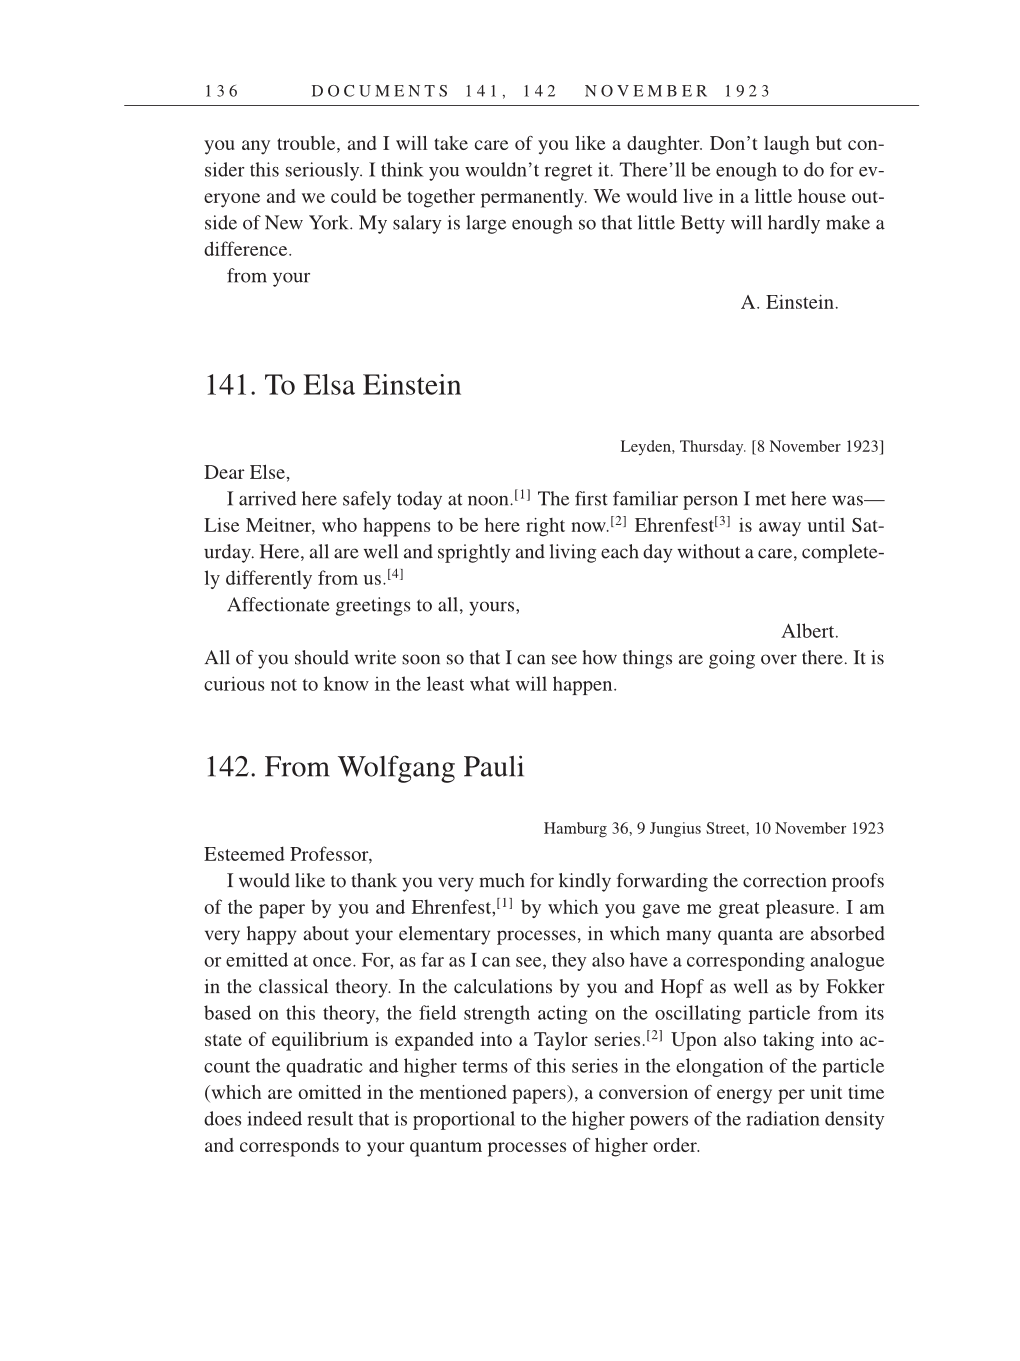 Volume 14: The Berlin Years: Writings & Correspondence, April 1923-May 1925 (English Translation Supplement) page 136